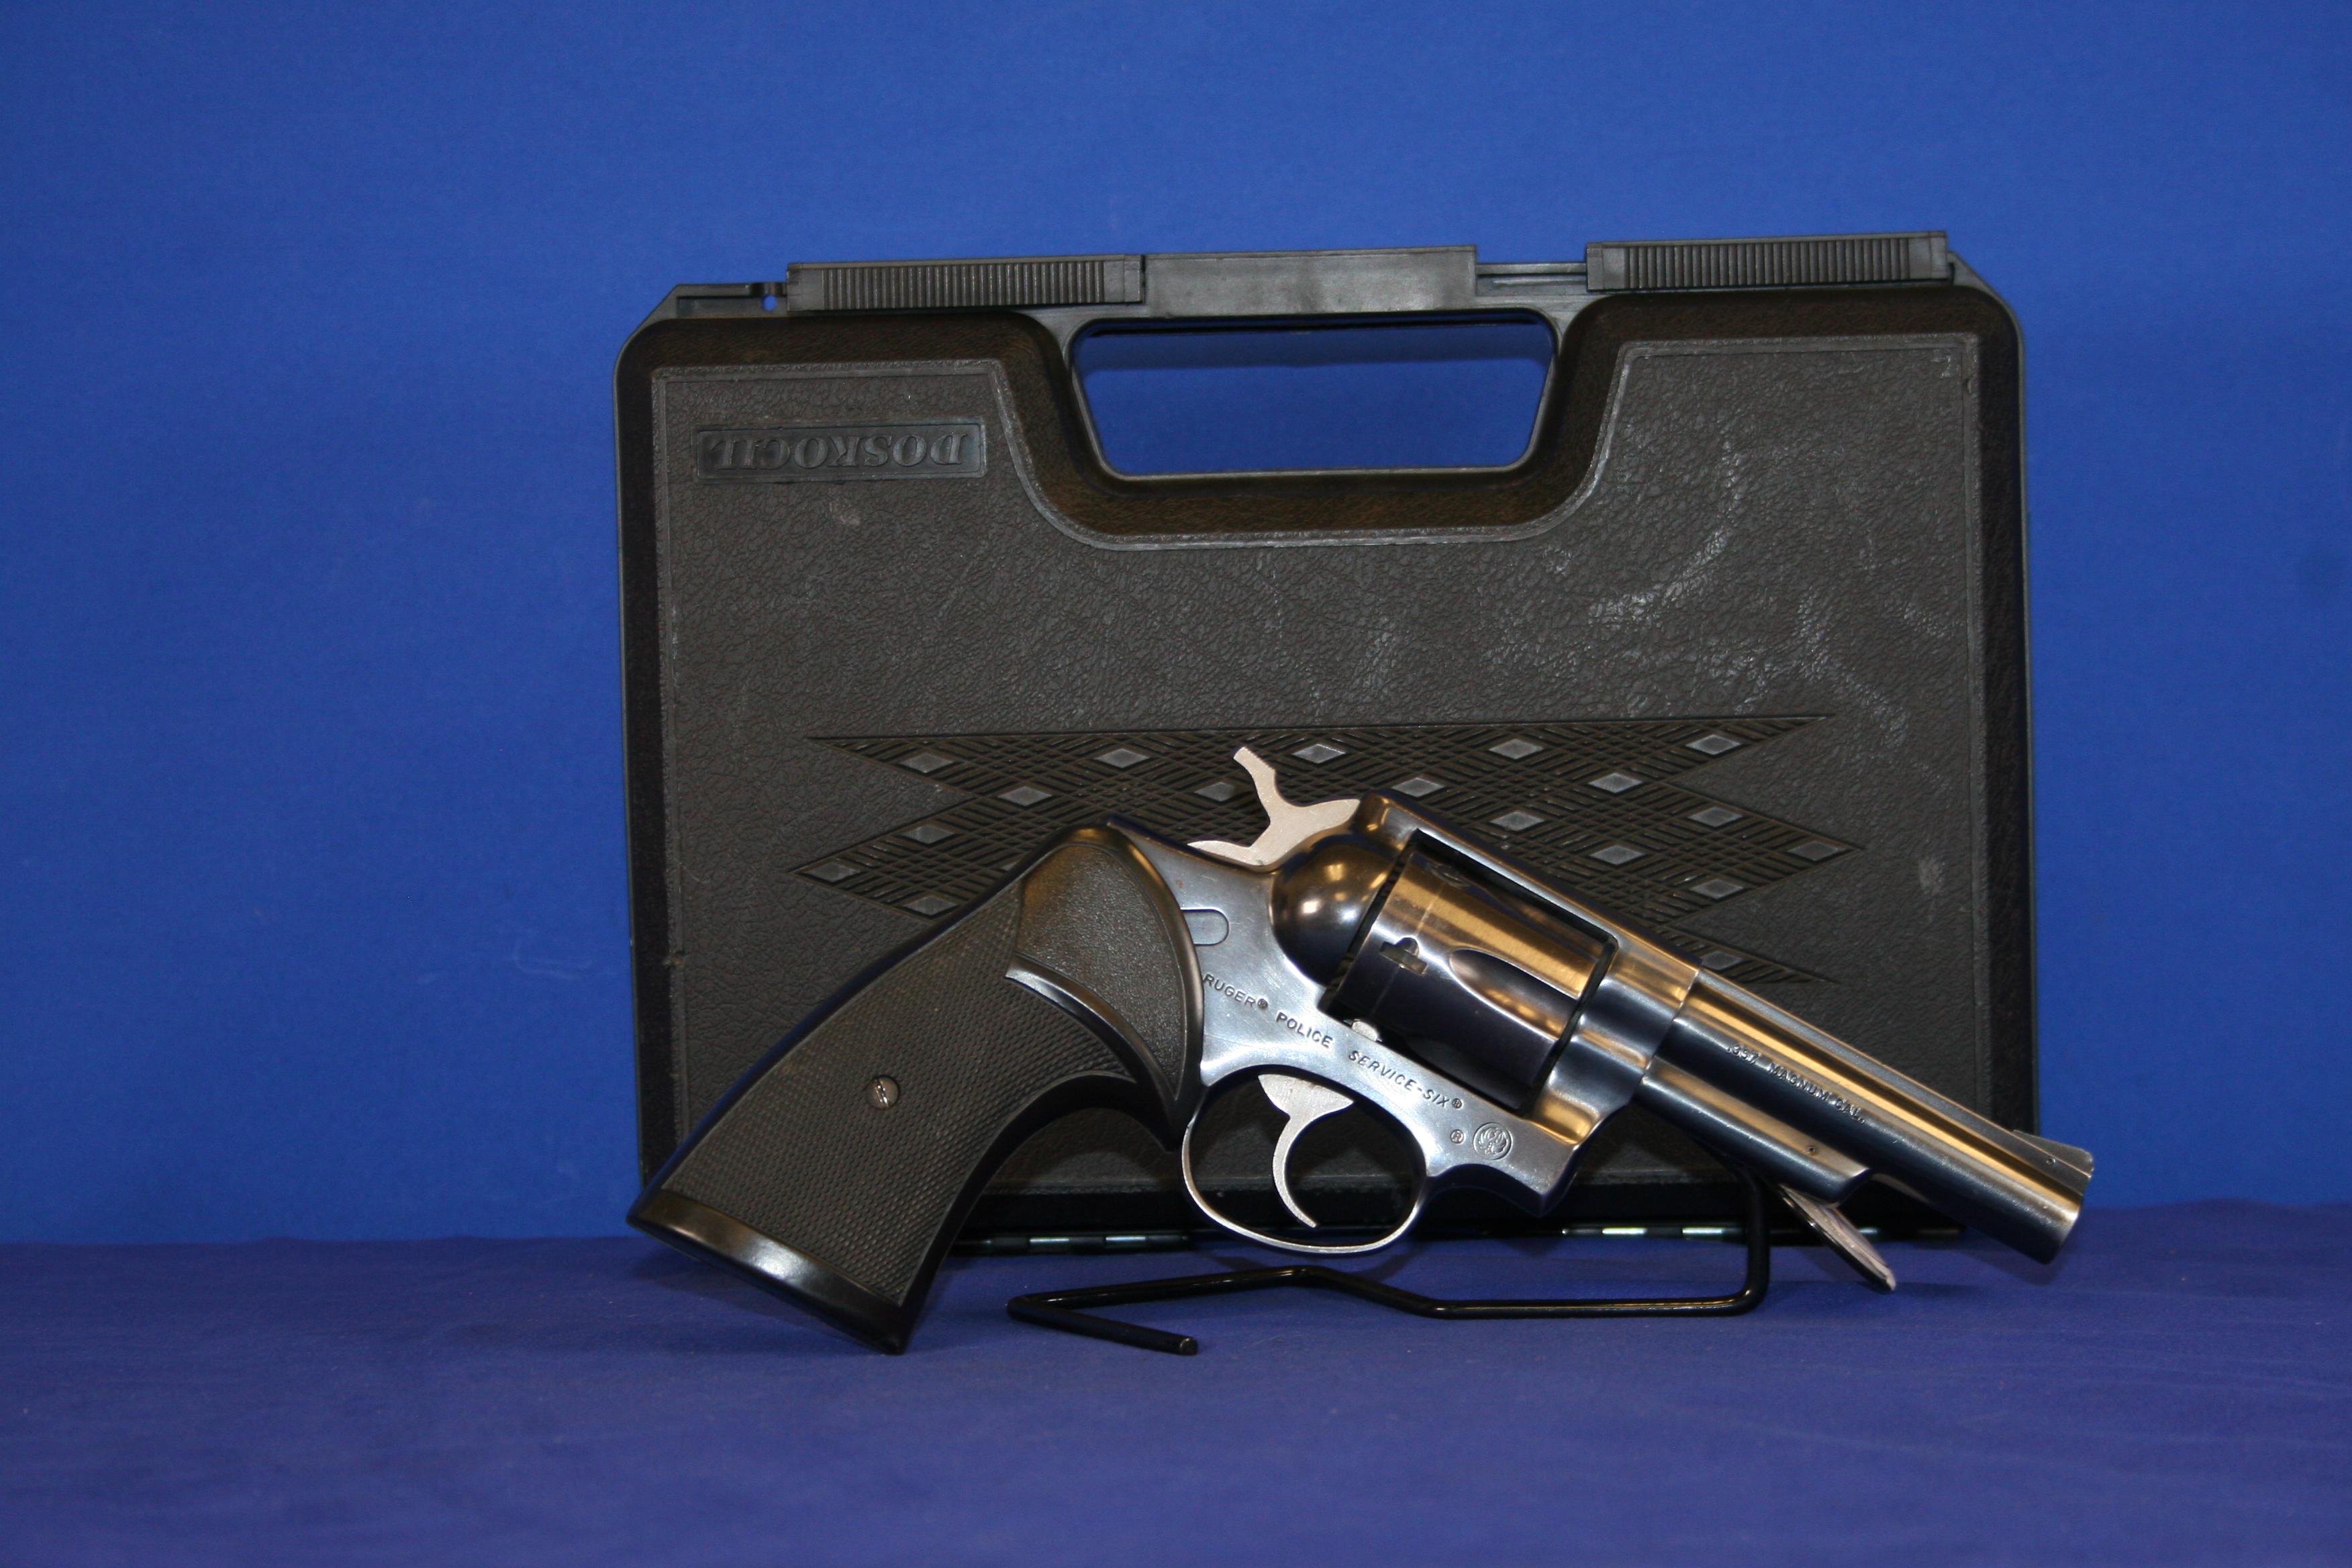 Ruger Police Service-Six 357, Revolver, 4" Barrel.  SN# 15614075. Not For Sale in California.